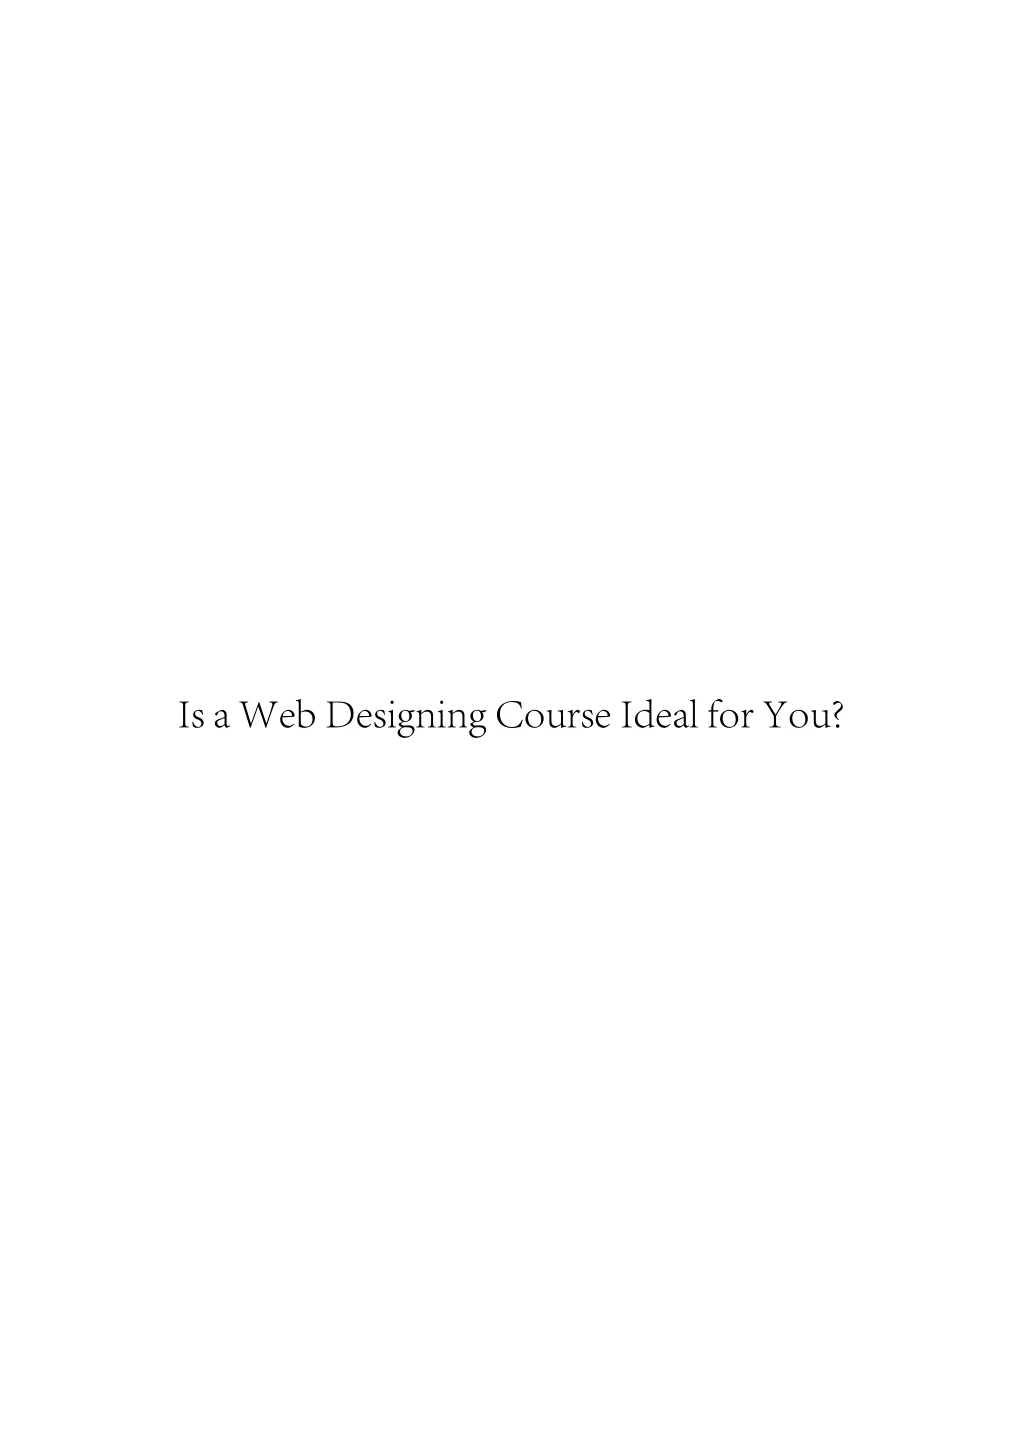 is a web designing course ideal for you